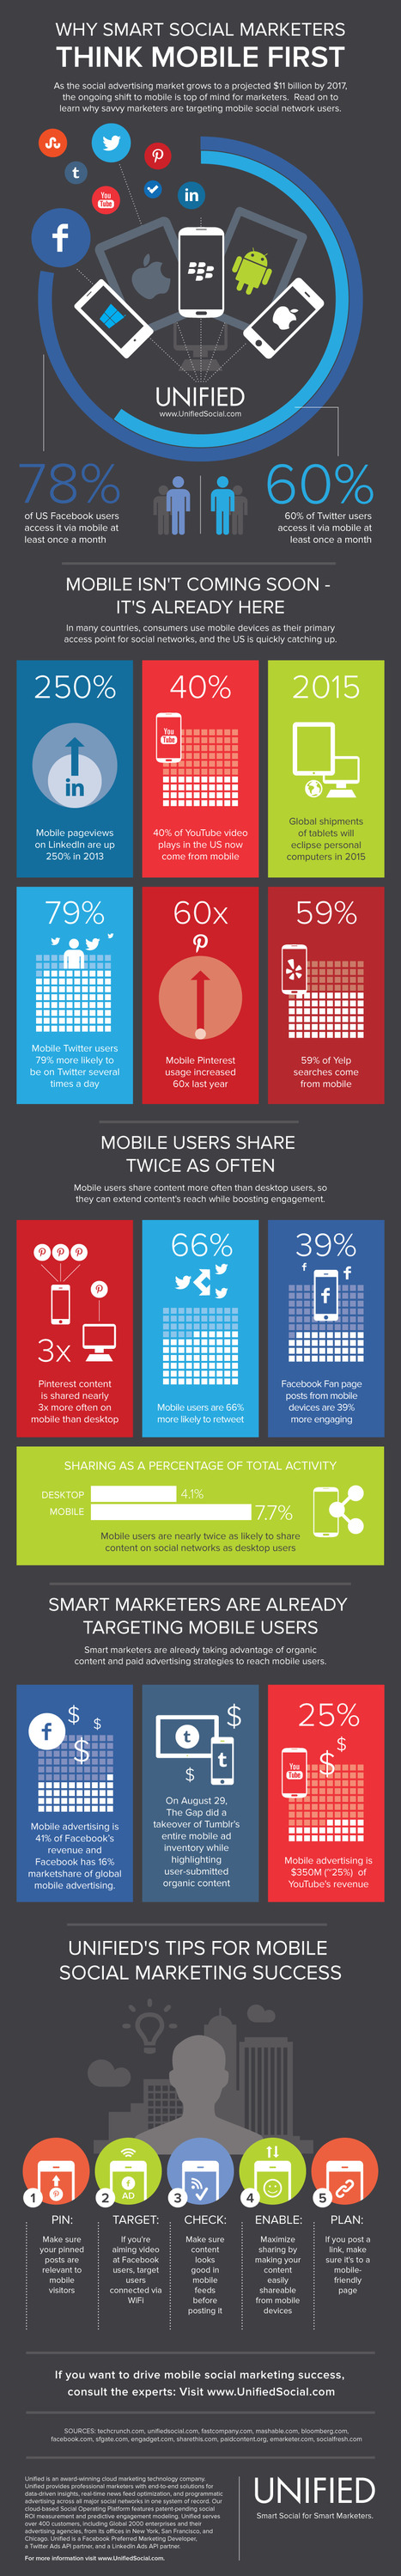 Why Smart Social Marketers Think Mobile First | Design, Science and Technology | Scoop.it